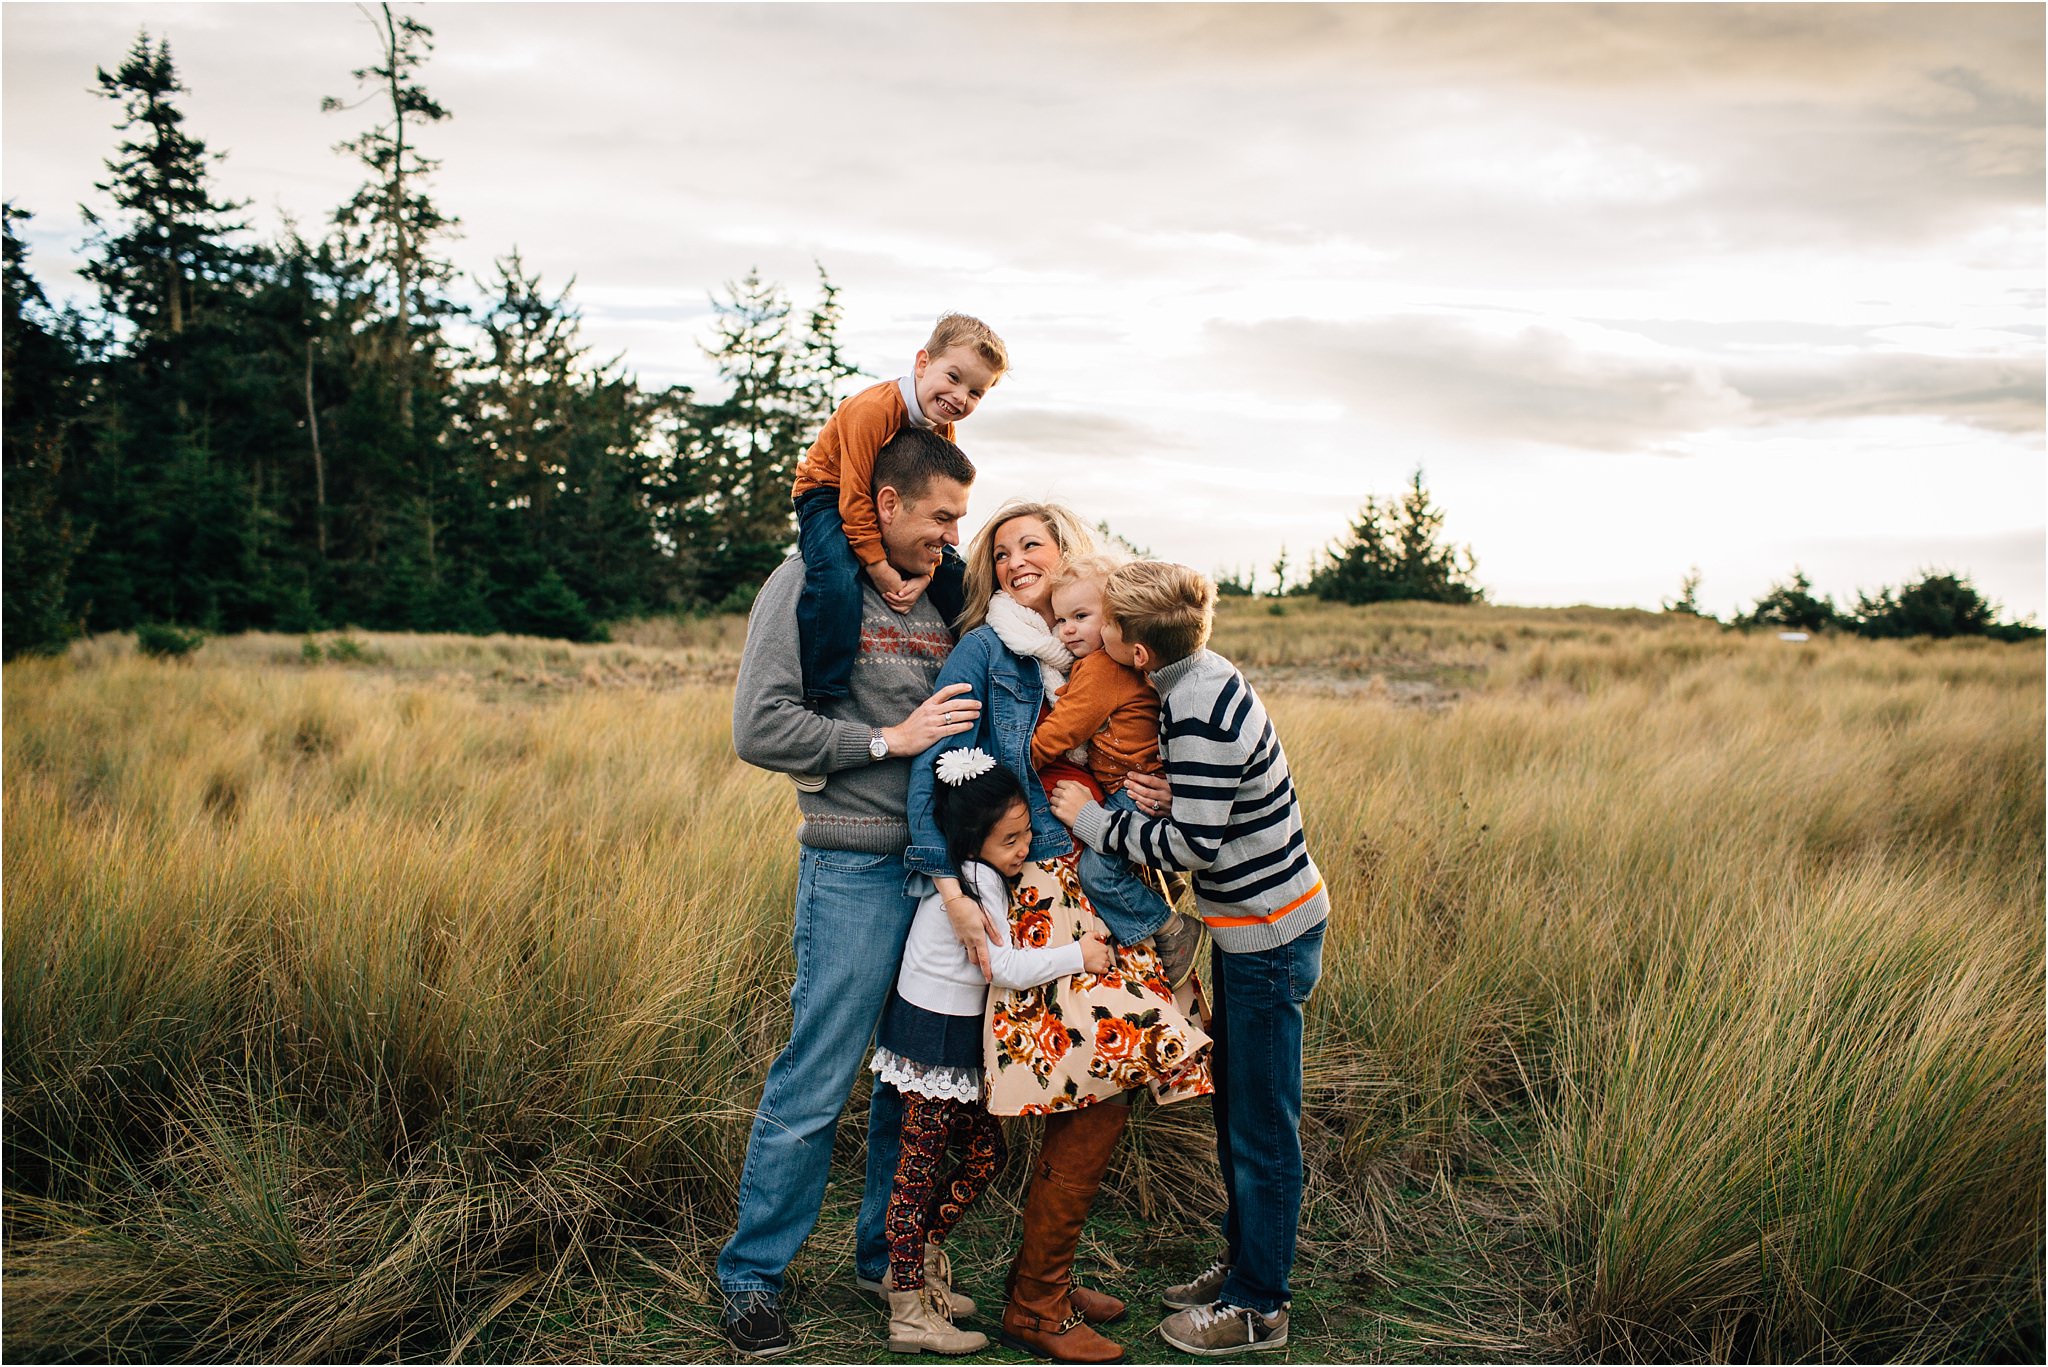 Whidbey-Island-Family-Photographer-Kara-Chappell-Photography_0016.jpg